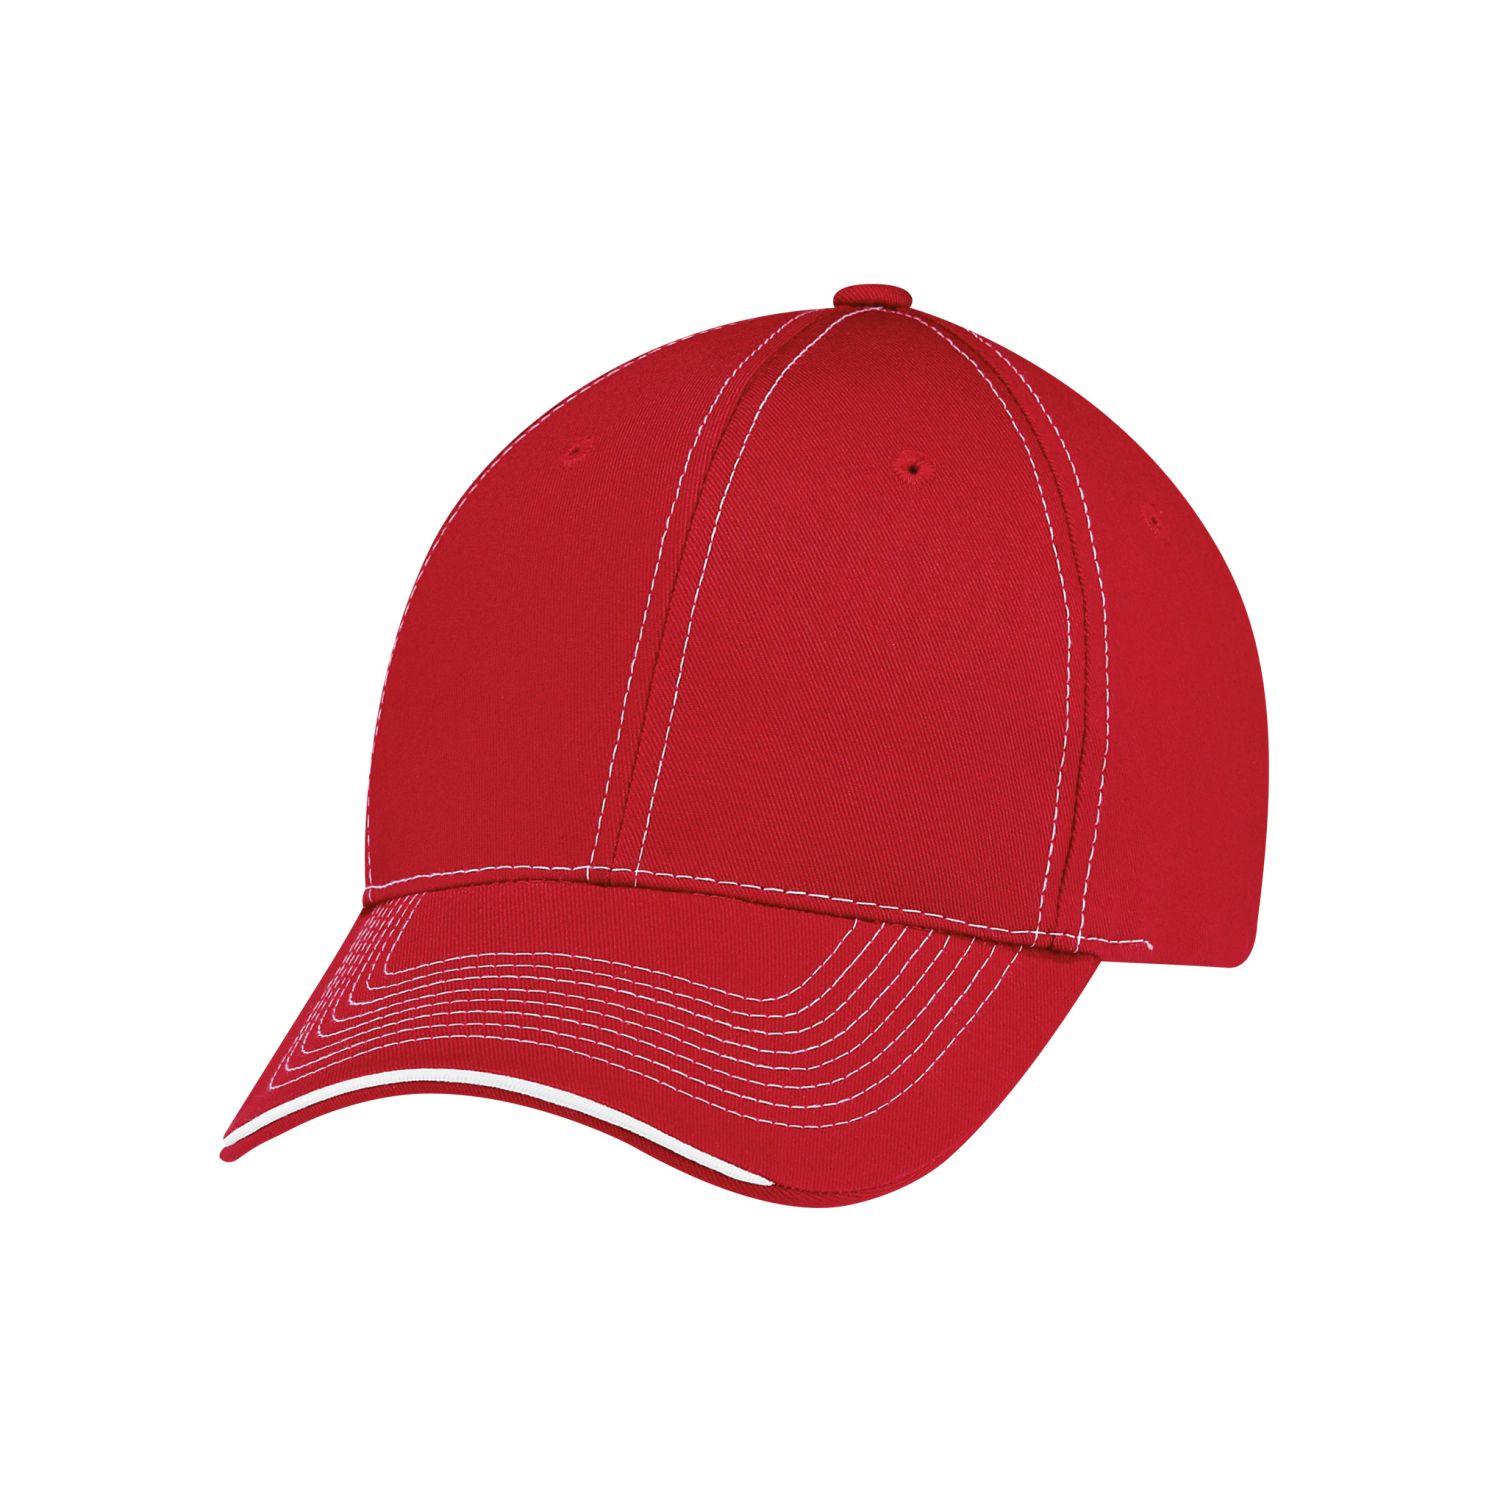 AJM 6-Panel Constructed Full-Fit Hat #6F617M Red / White